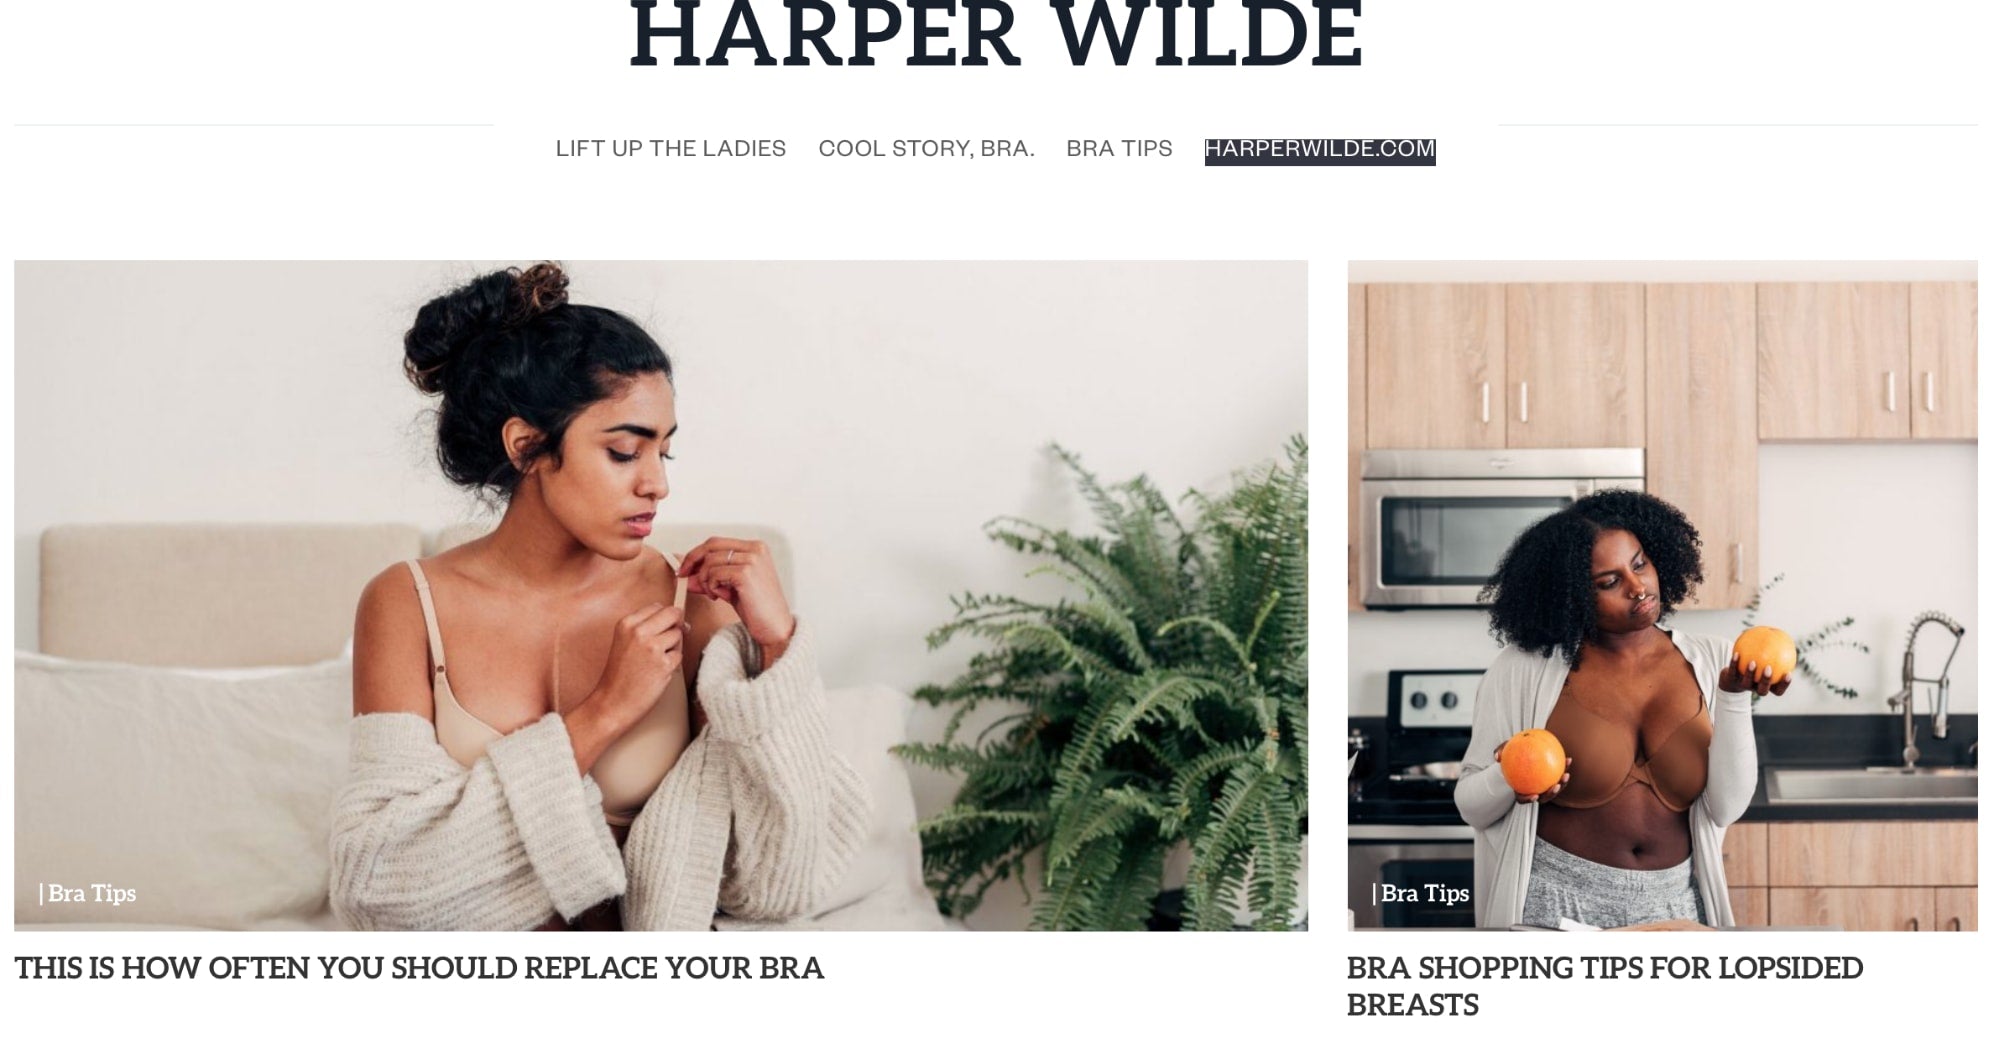 blog example for a bra company